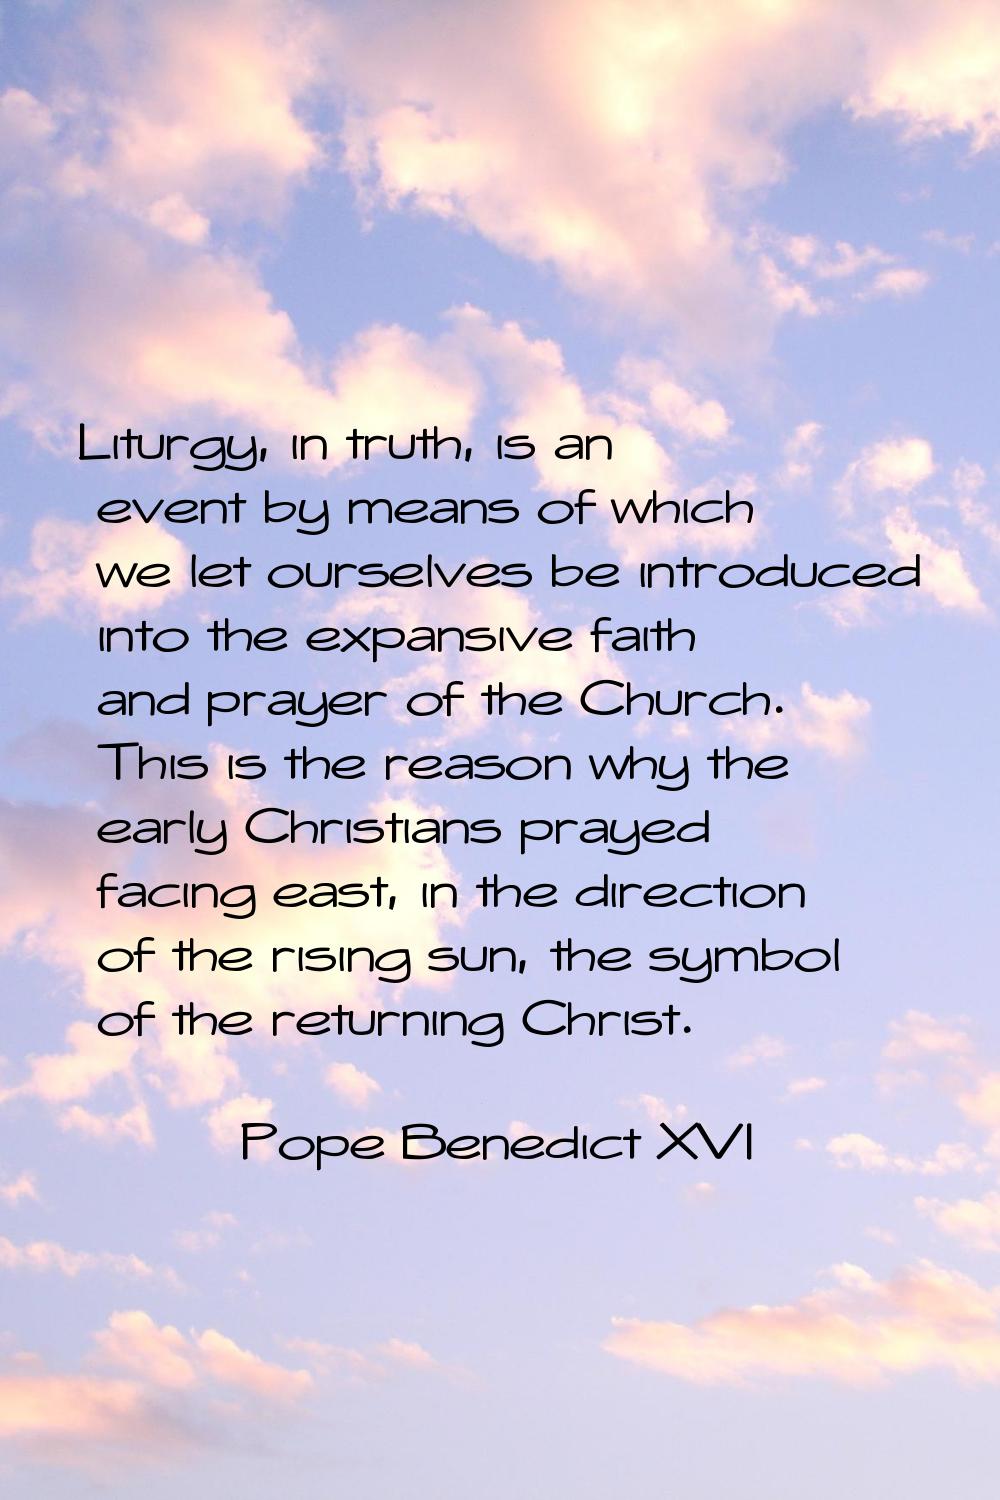 Liturgy, in truth, is an event by means of which we let ourselves be introduced into the expansive 